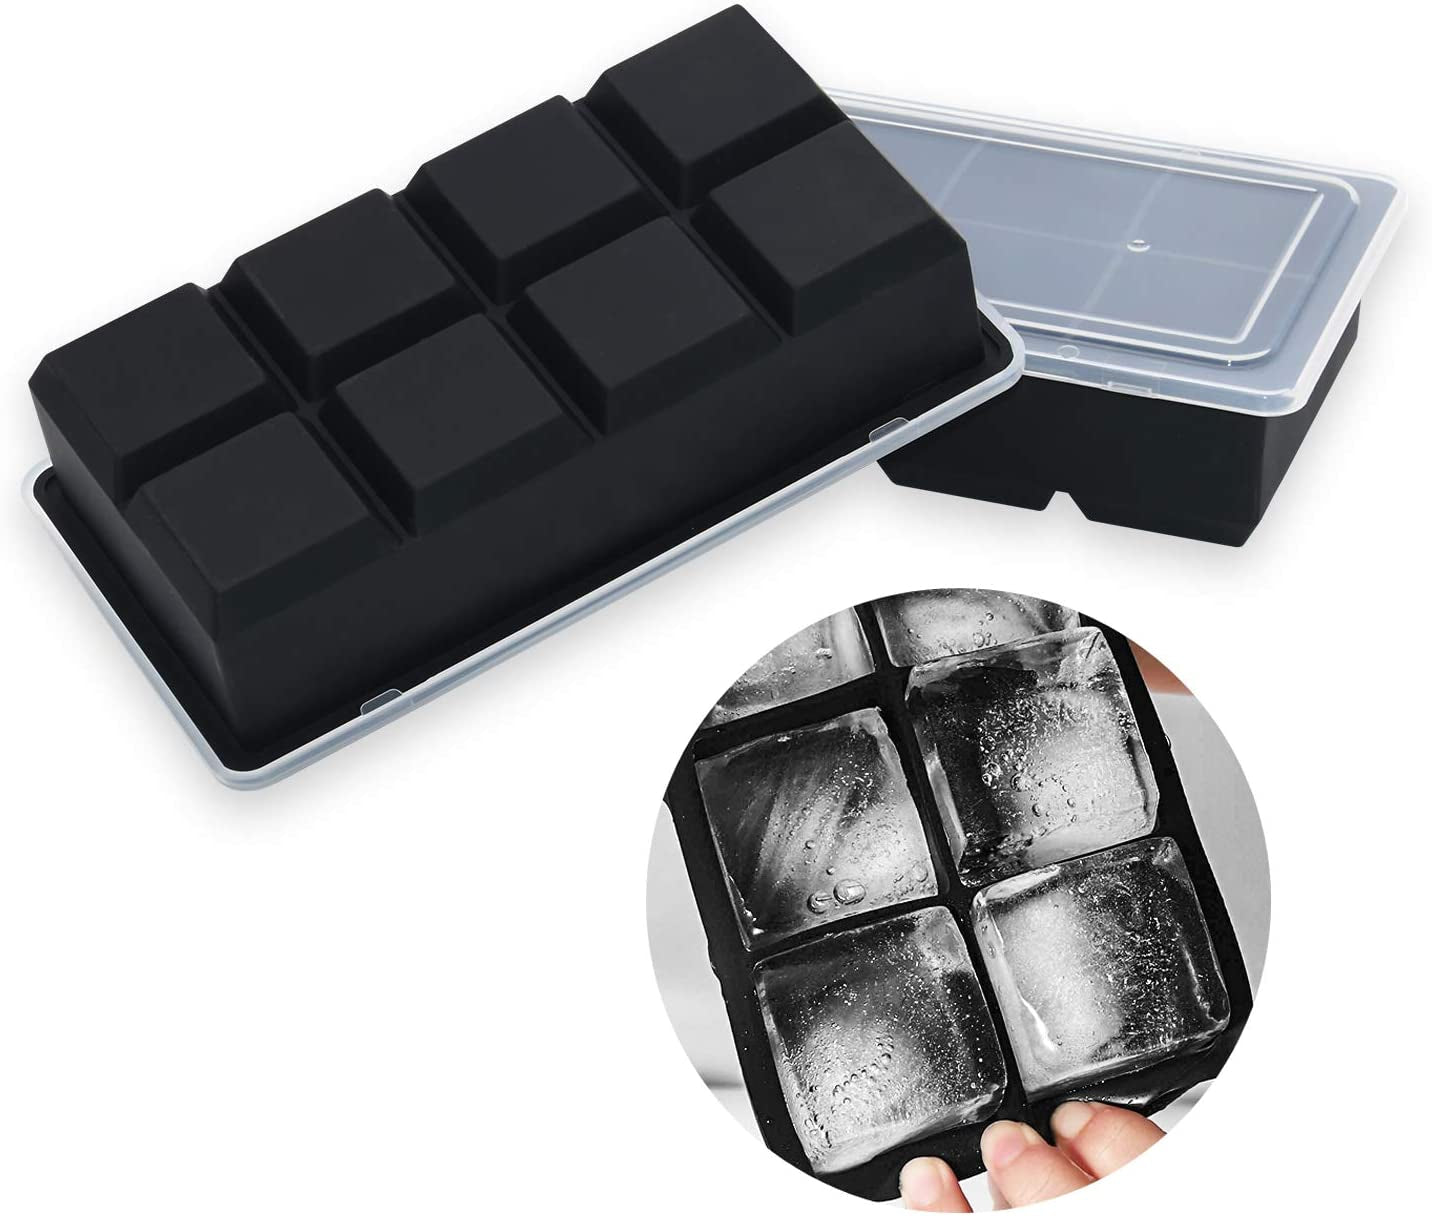 Large Ice Cube Trays with Lids 2 Pack,Silicone Ice Trays for Freezer,Easy Release Silicone Ice Cube Tray,8 Big Square Ice Cubes per Tray Ideal for Cocktails,Whiskey,Soups and Frozen Treats